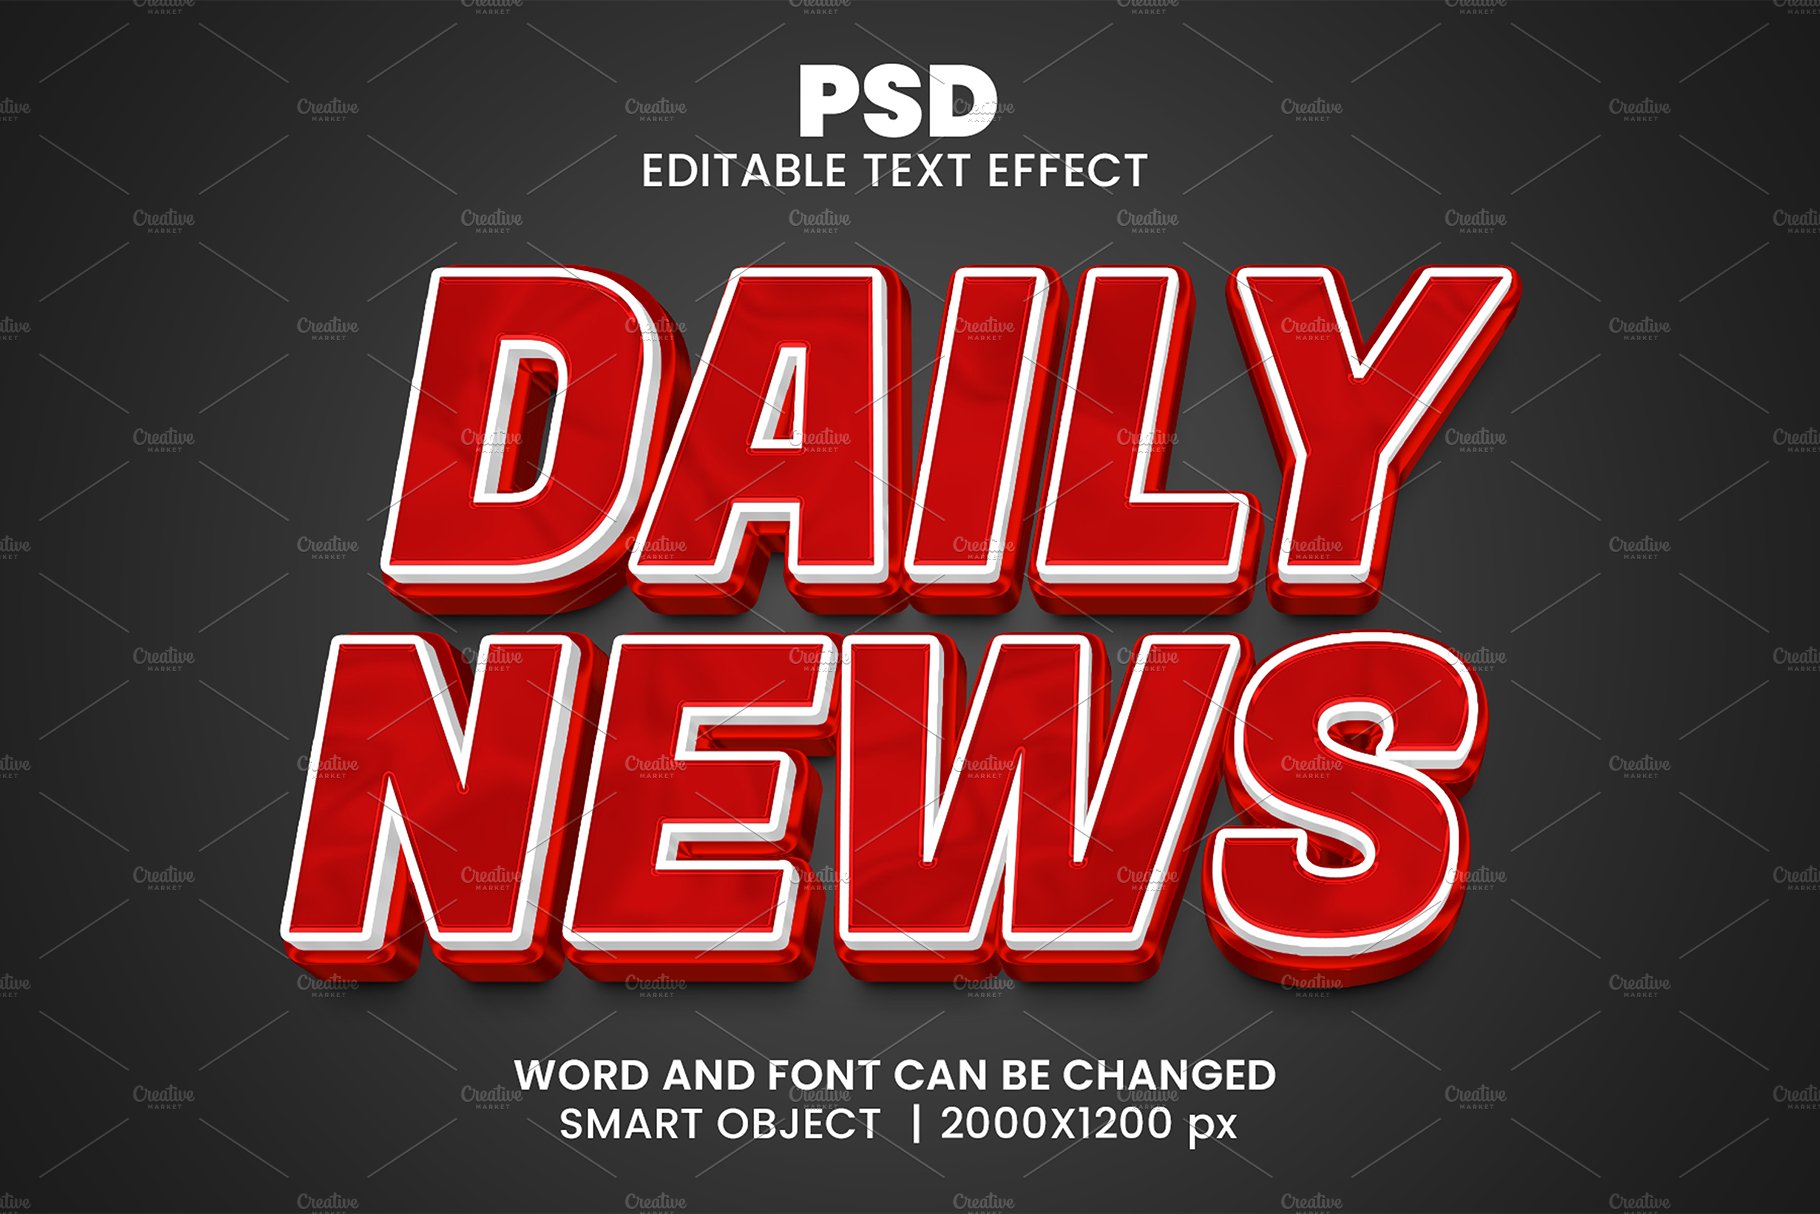 Daily news Editable Psd Text Effectcover image.